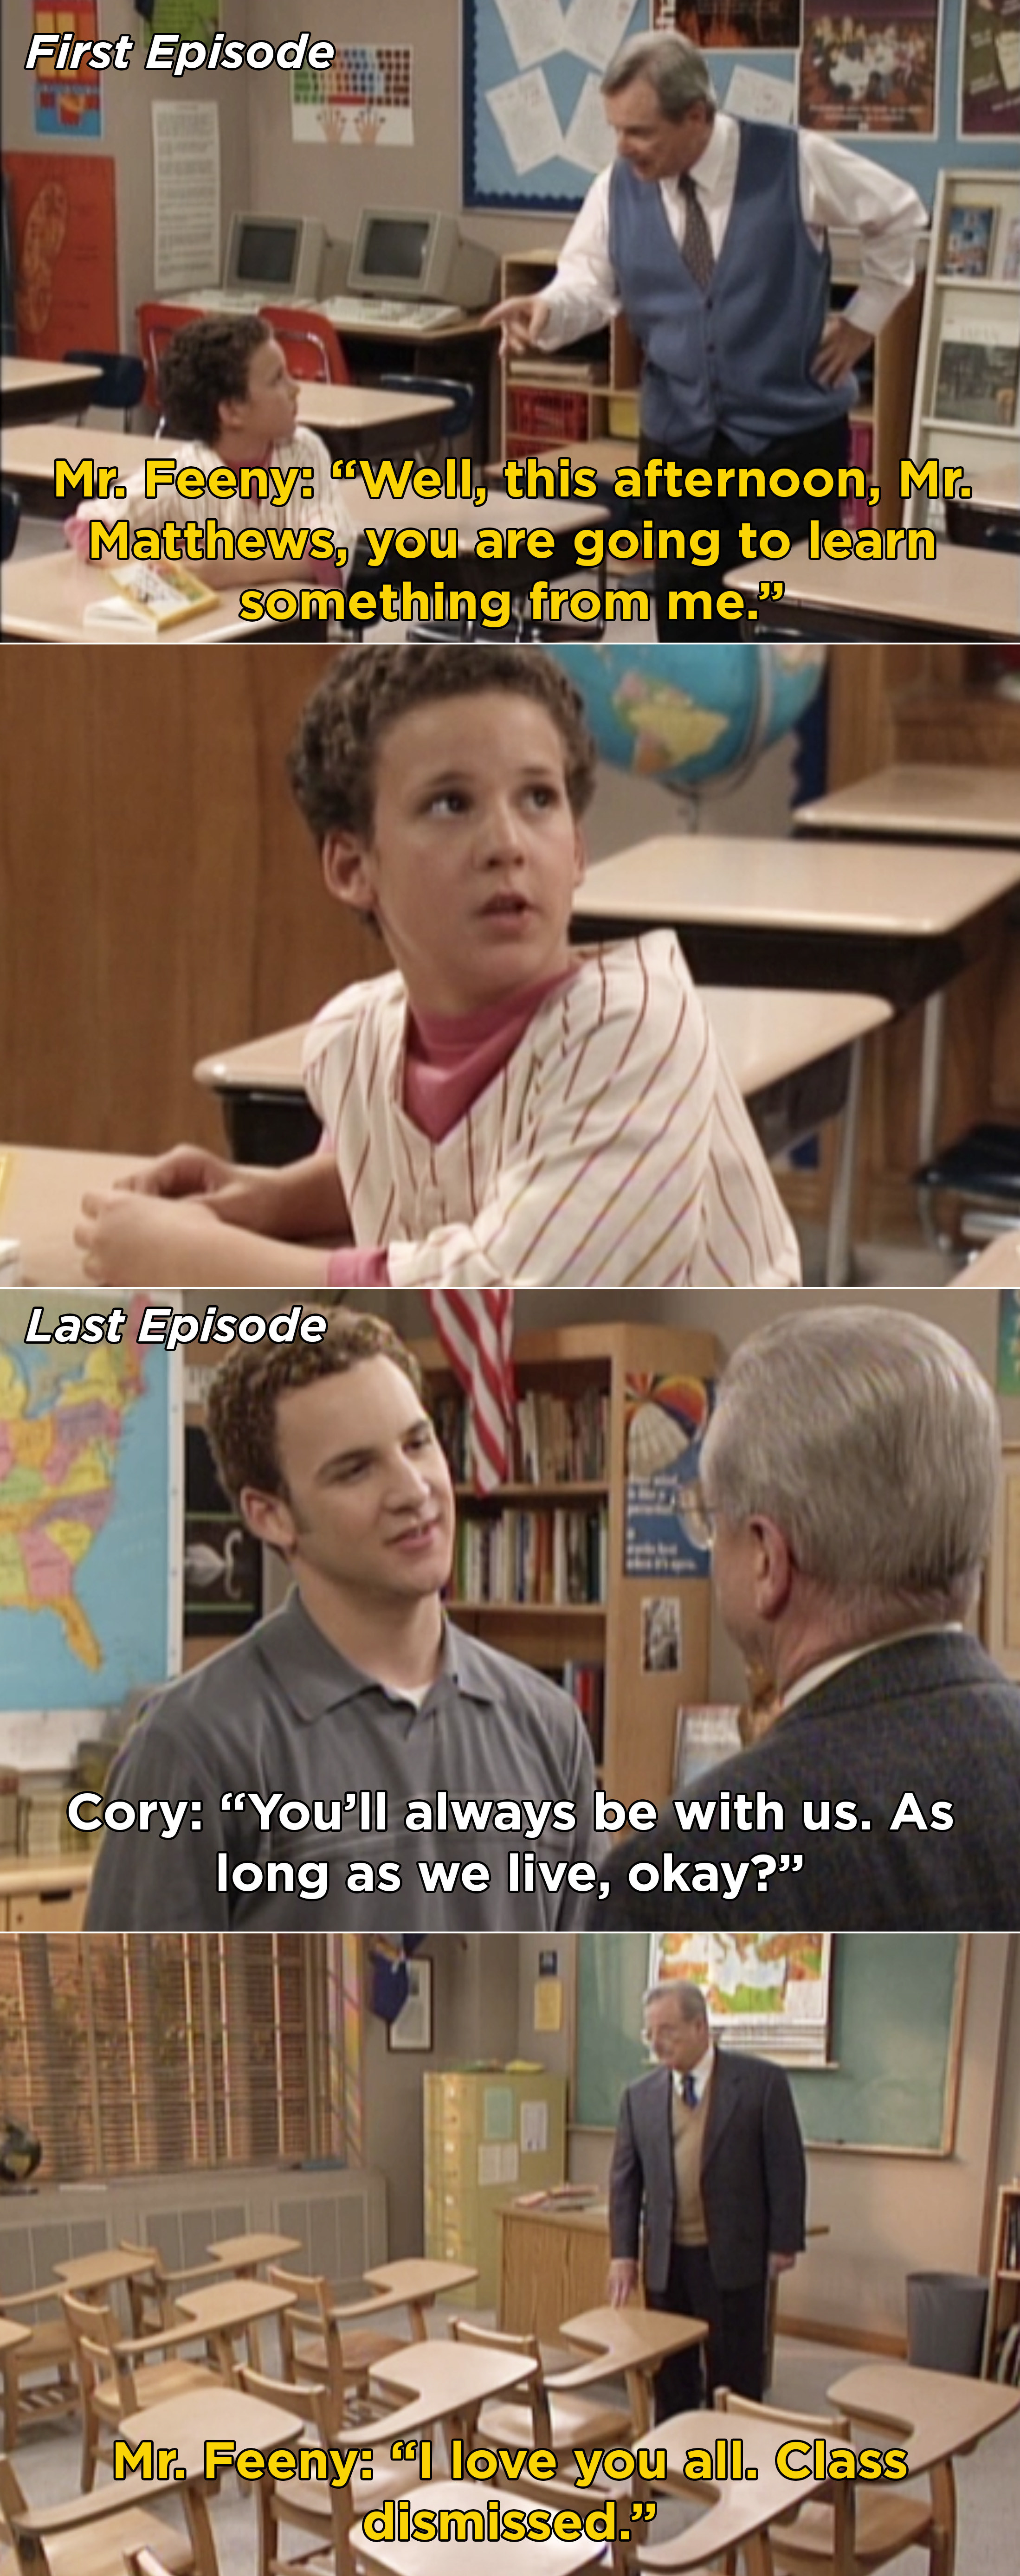 Mr. Feeny telling a young Cory he&#x27;ll learn something from him, then Cory saying goodbye to Mr. Feeny in the series finalev